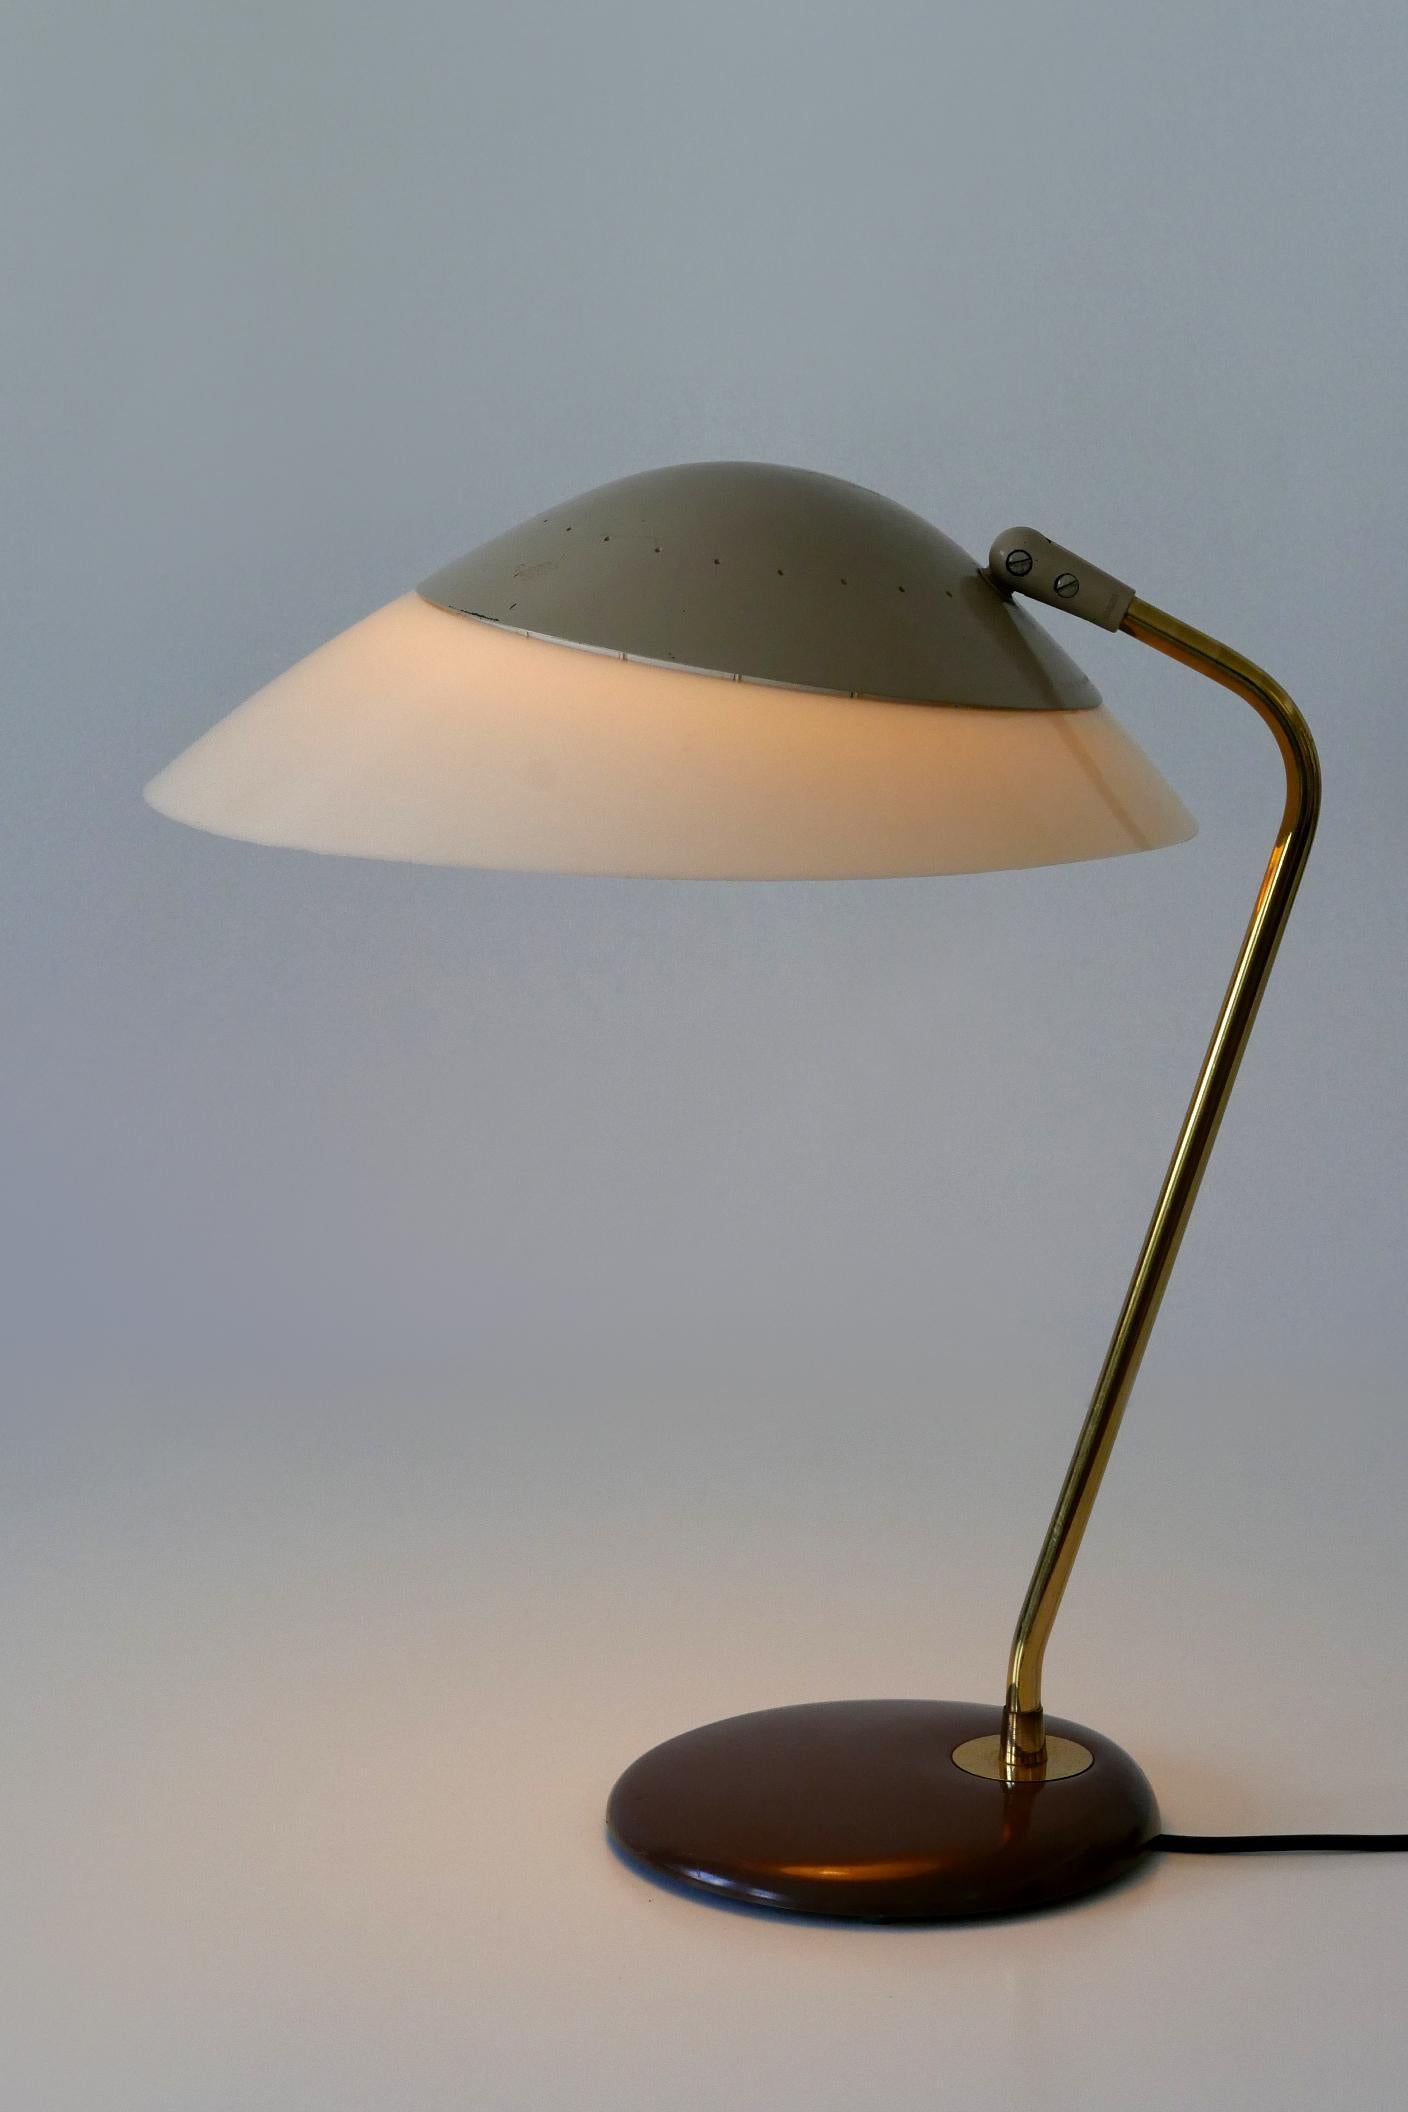 Elegant Mid-Century Modern table lamp or desk light. Designed by Gerald Thurston for Lightolier, USA, 1950s.

Executed in brass, aluminium, lucite and metal, the table lamp comes with 1 x E27 / E26 Edison screw fit bulb holder, is rewired, in